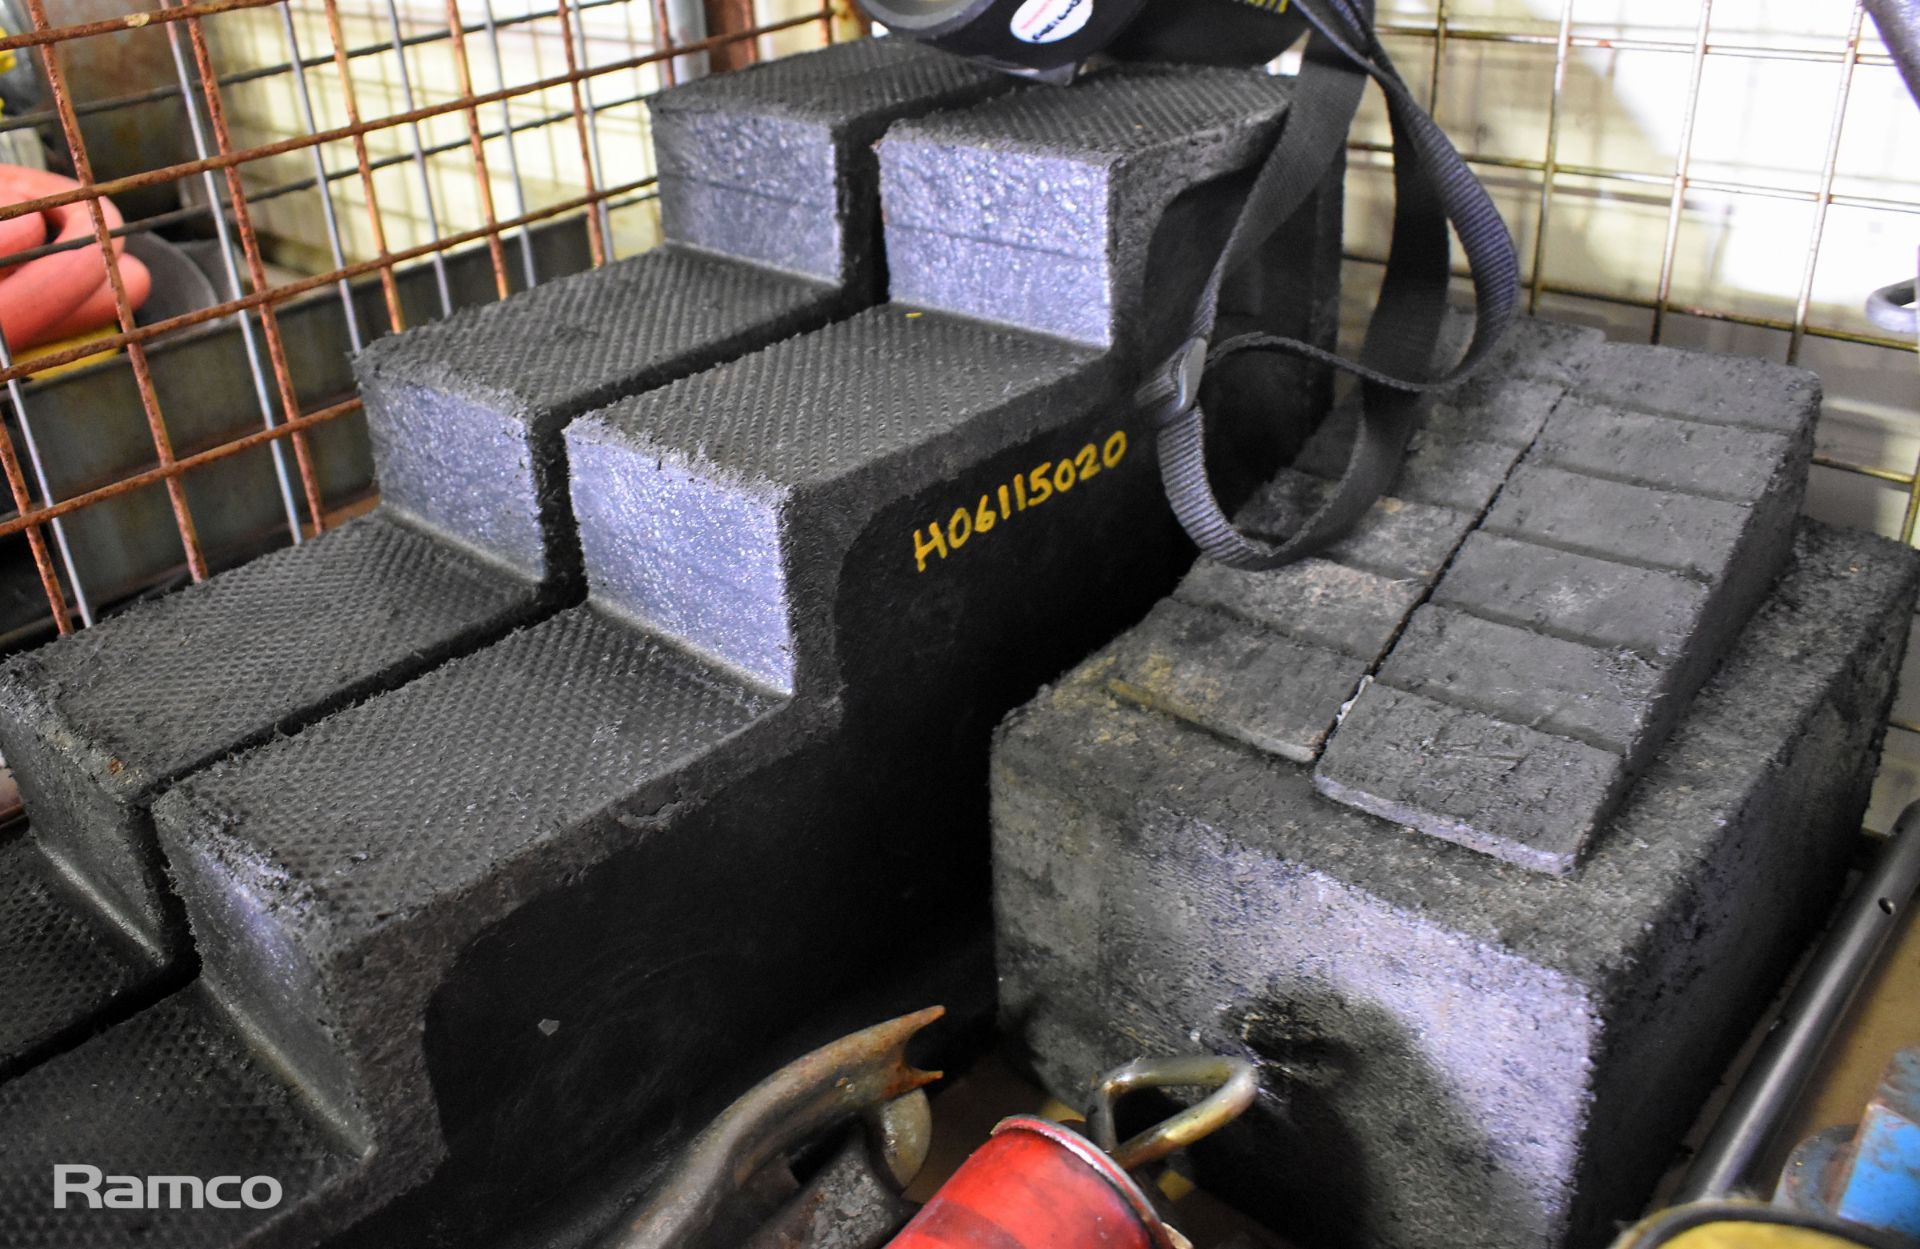 Fire and rescue accessories - hand tools, RTC chocks & blocks, ropes, lights, chemical sorbent pads - Image 4 of 13